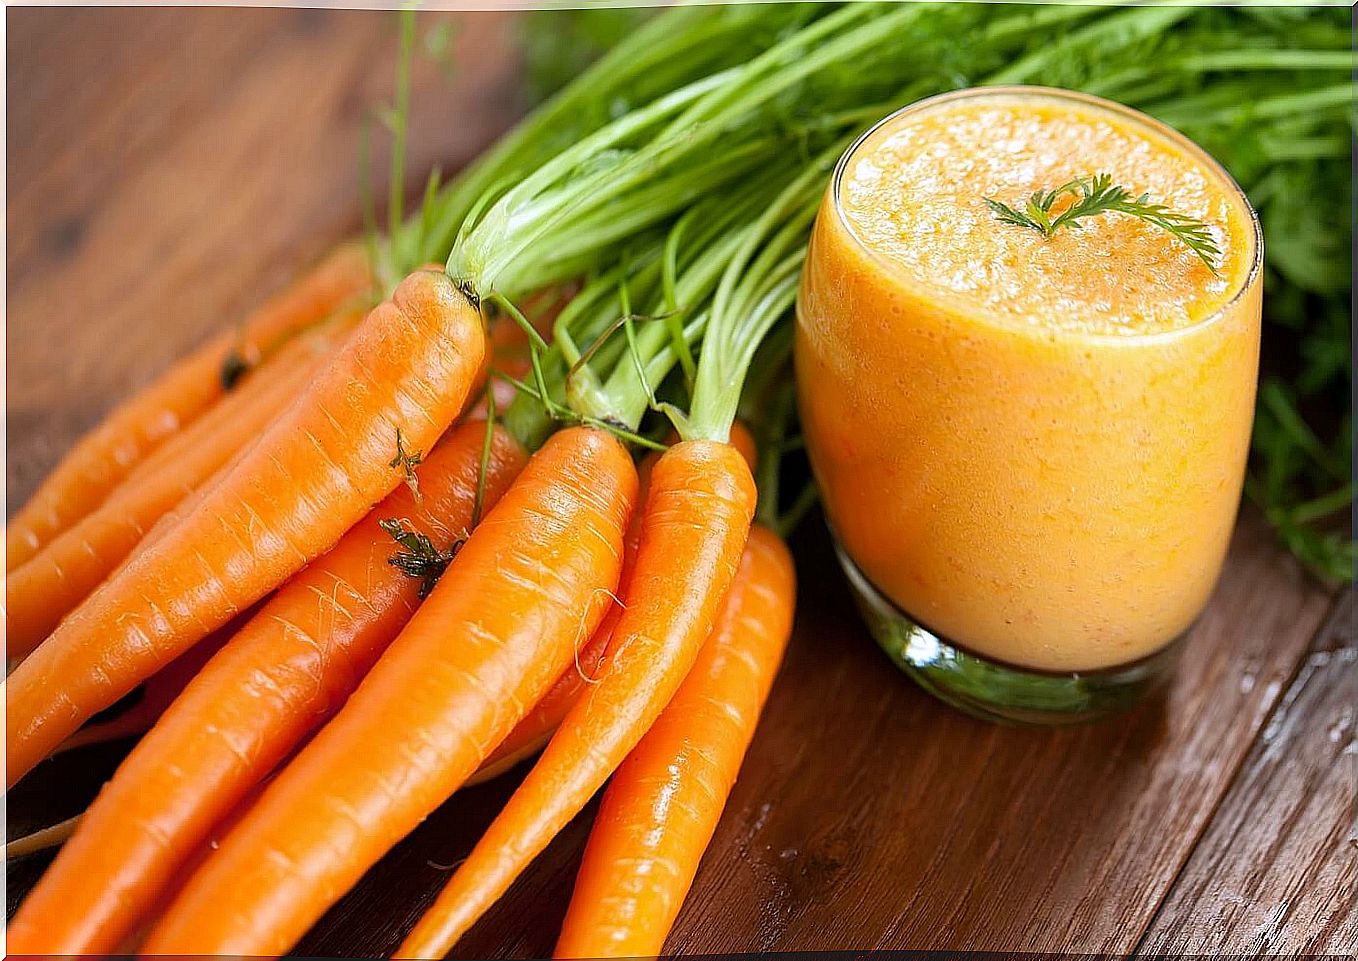 How to make a carrot smoothie at home and what are its benefits